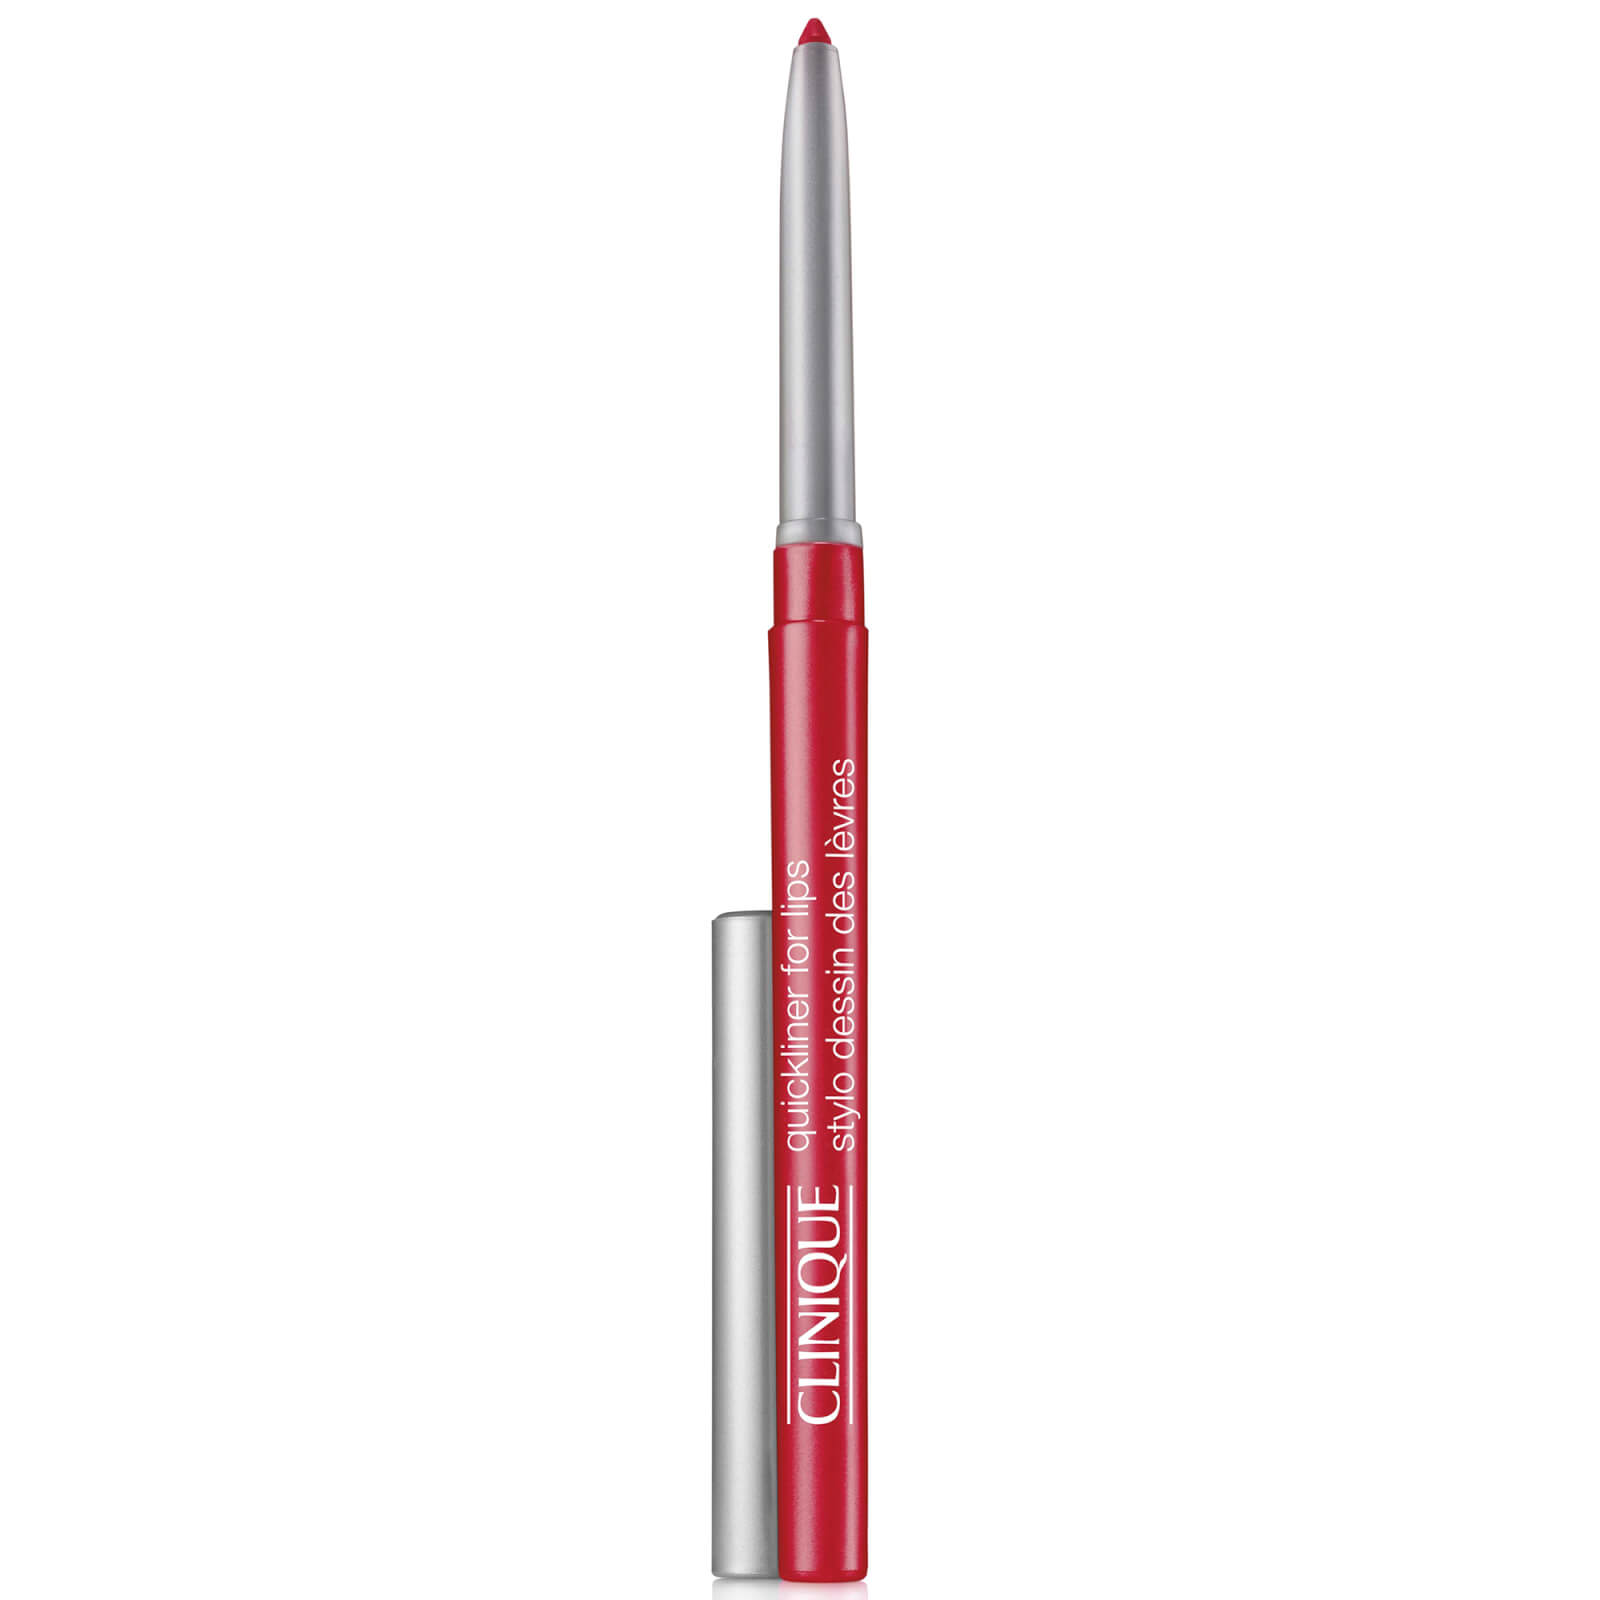 Clinique Quickliner for Lips 0.3g (Various Shades) - Intense Passion